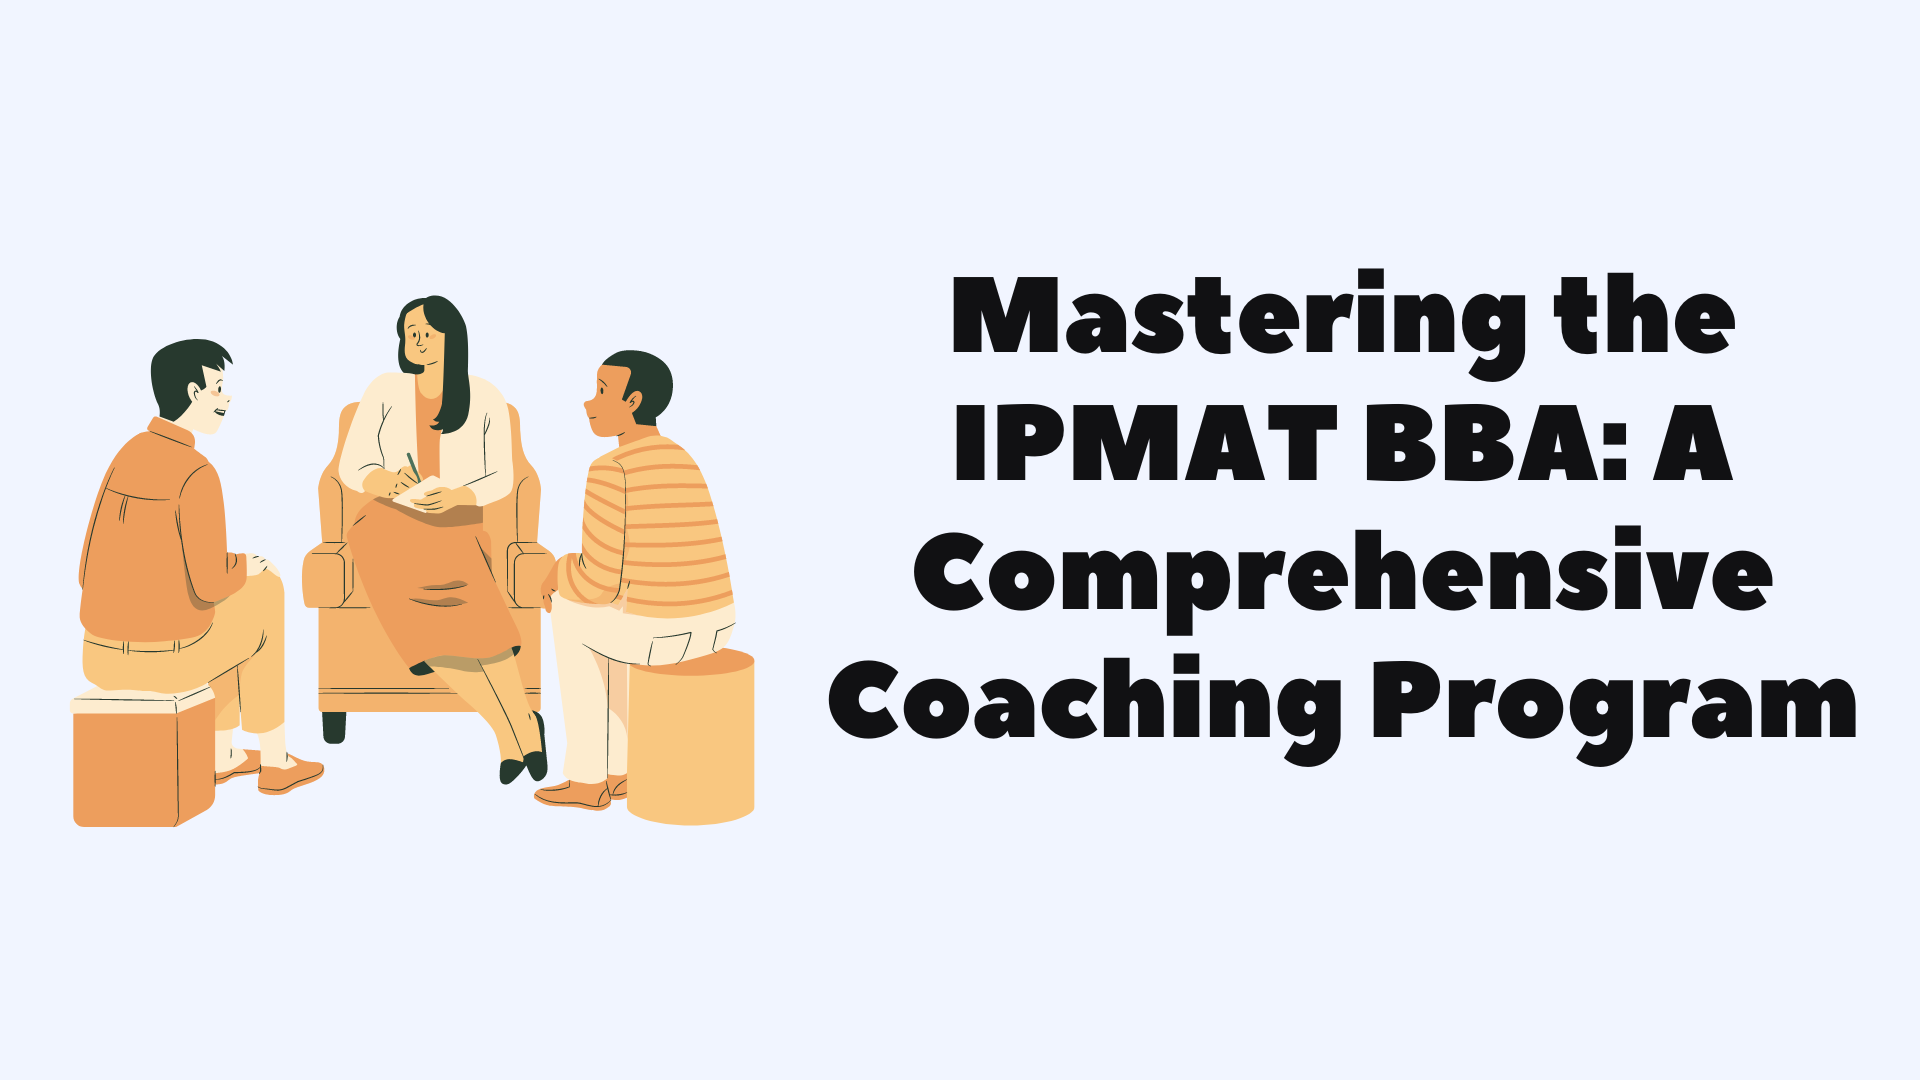 Mastering the IPMAT BBA: A Comprehensive Coaching Program